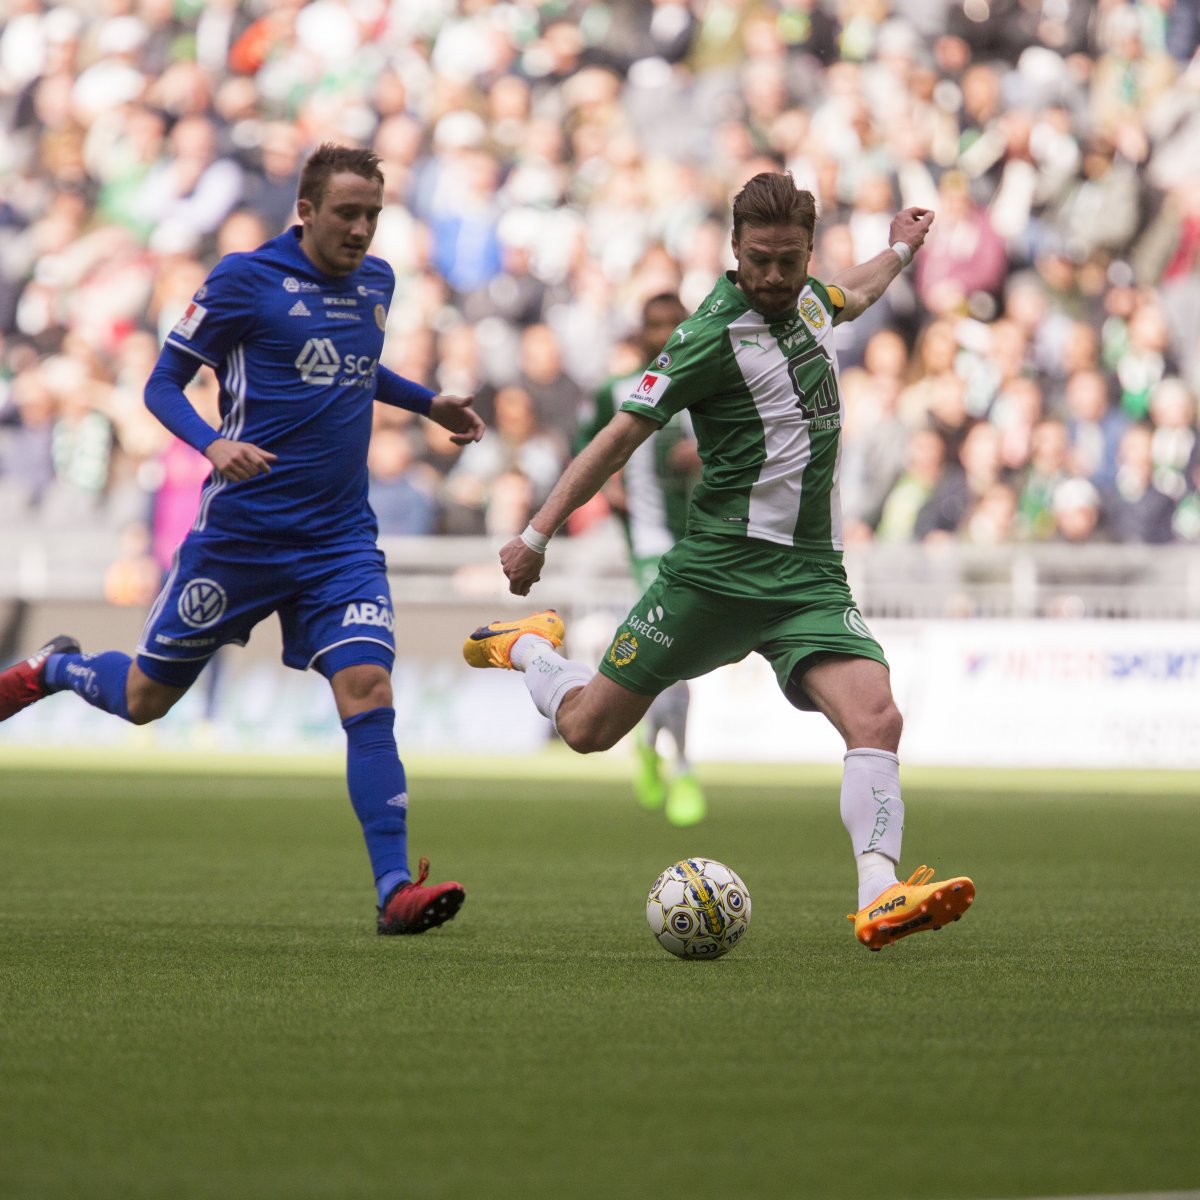 Hammarby soccer player about to kick the ball